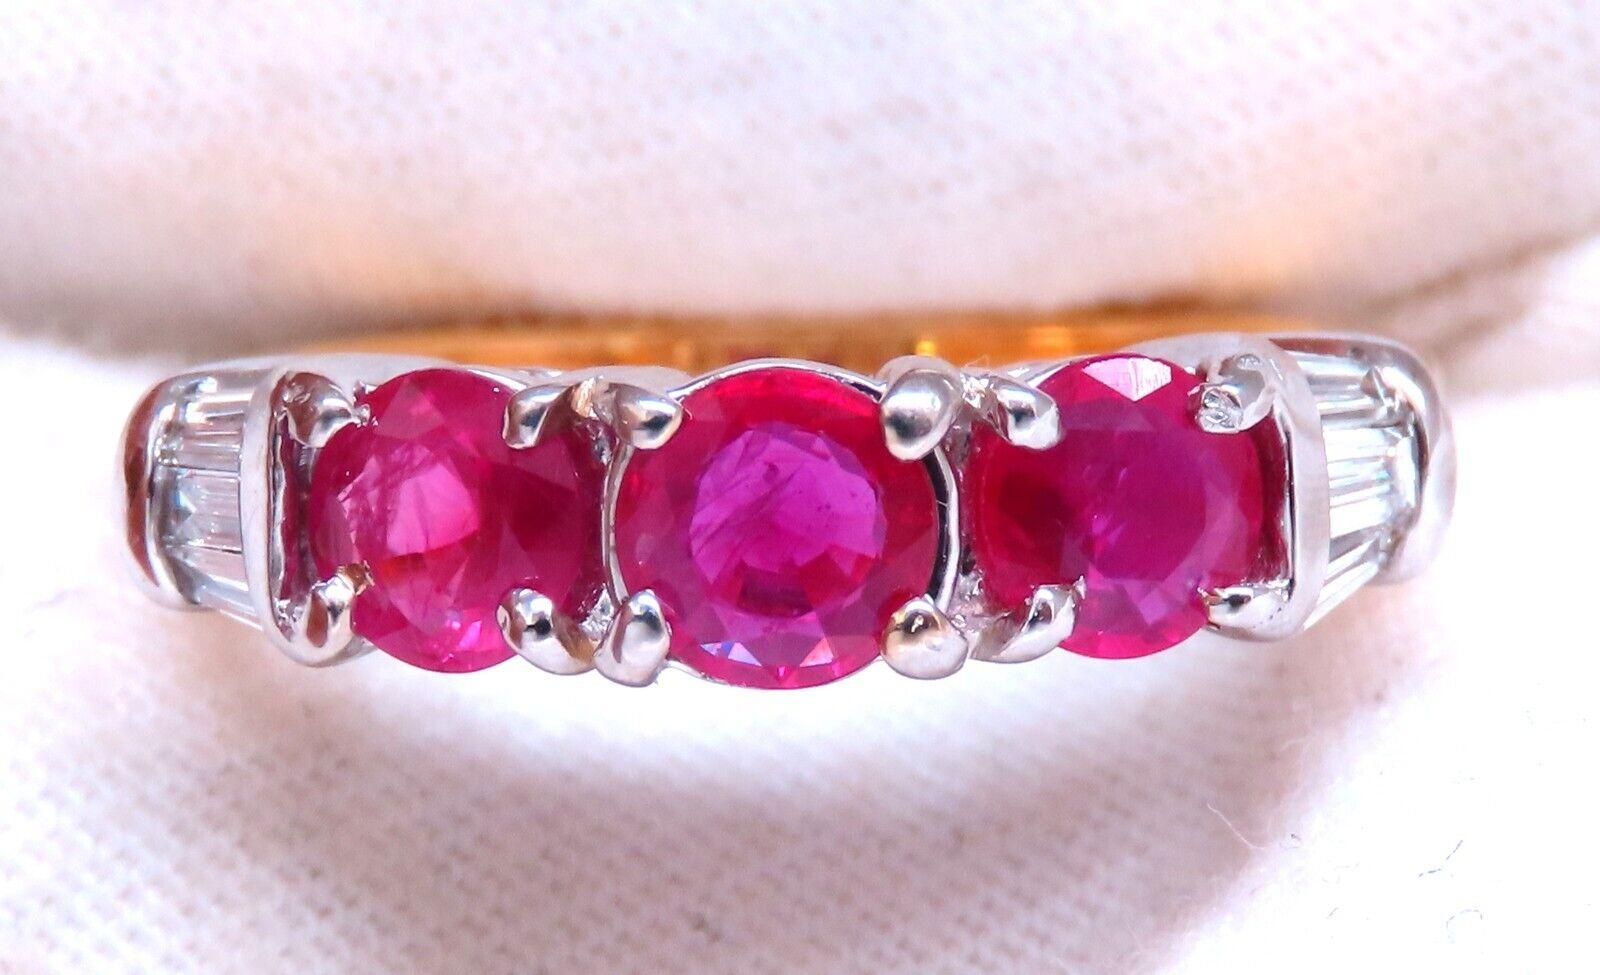 1.50ct Natural Rubies Ring.

Round  Brilliant Cut

4mm each

.25ct. Side baguette Diamonds:

H-color Vs-2 clarity.

18kt. yellow gold

7.1 grams.

current ring size: 7

May be resized, please inquire. 

$4,000 Appraisal Certificate to accompany